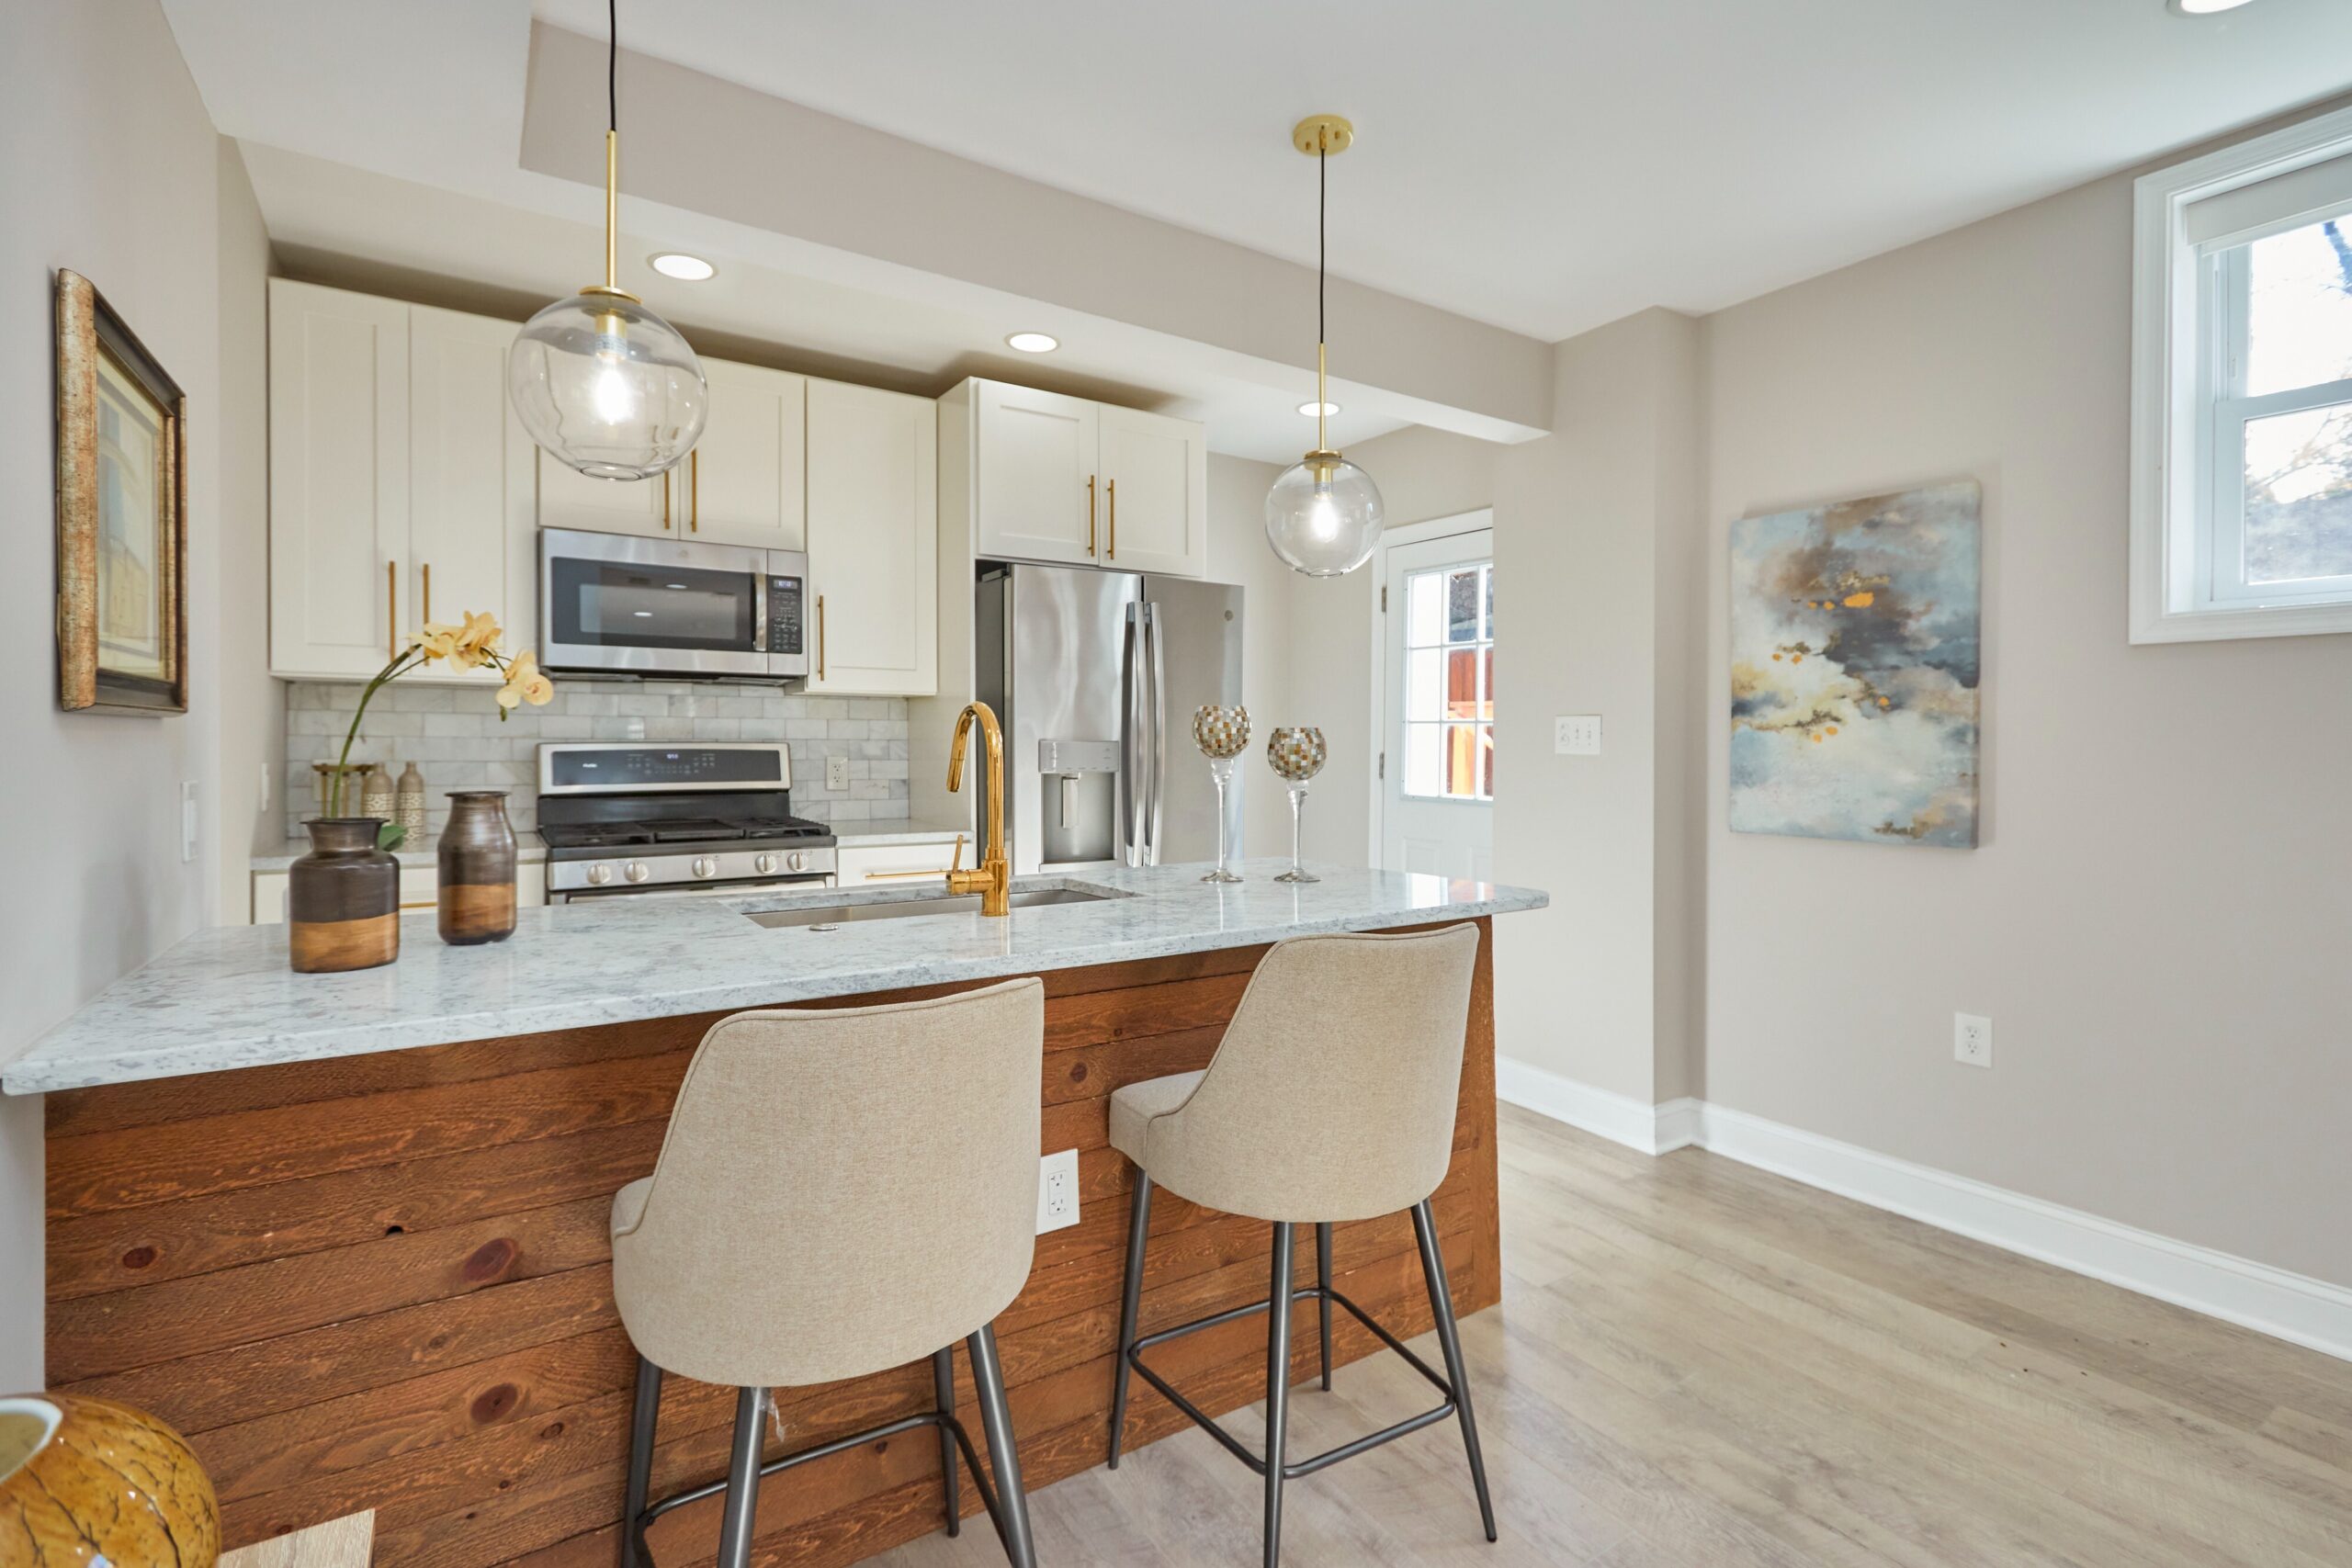 Professional interior photo of 1219 50th St NE in Washington, DC - showing the fully remodeled kitchen with quartz countertop island/peninsula and bar with white cabinets, stainless appliances and brushed cold hardware